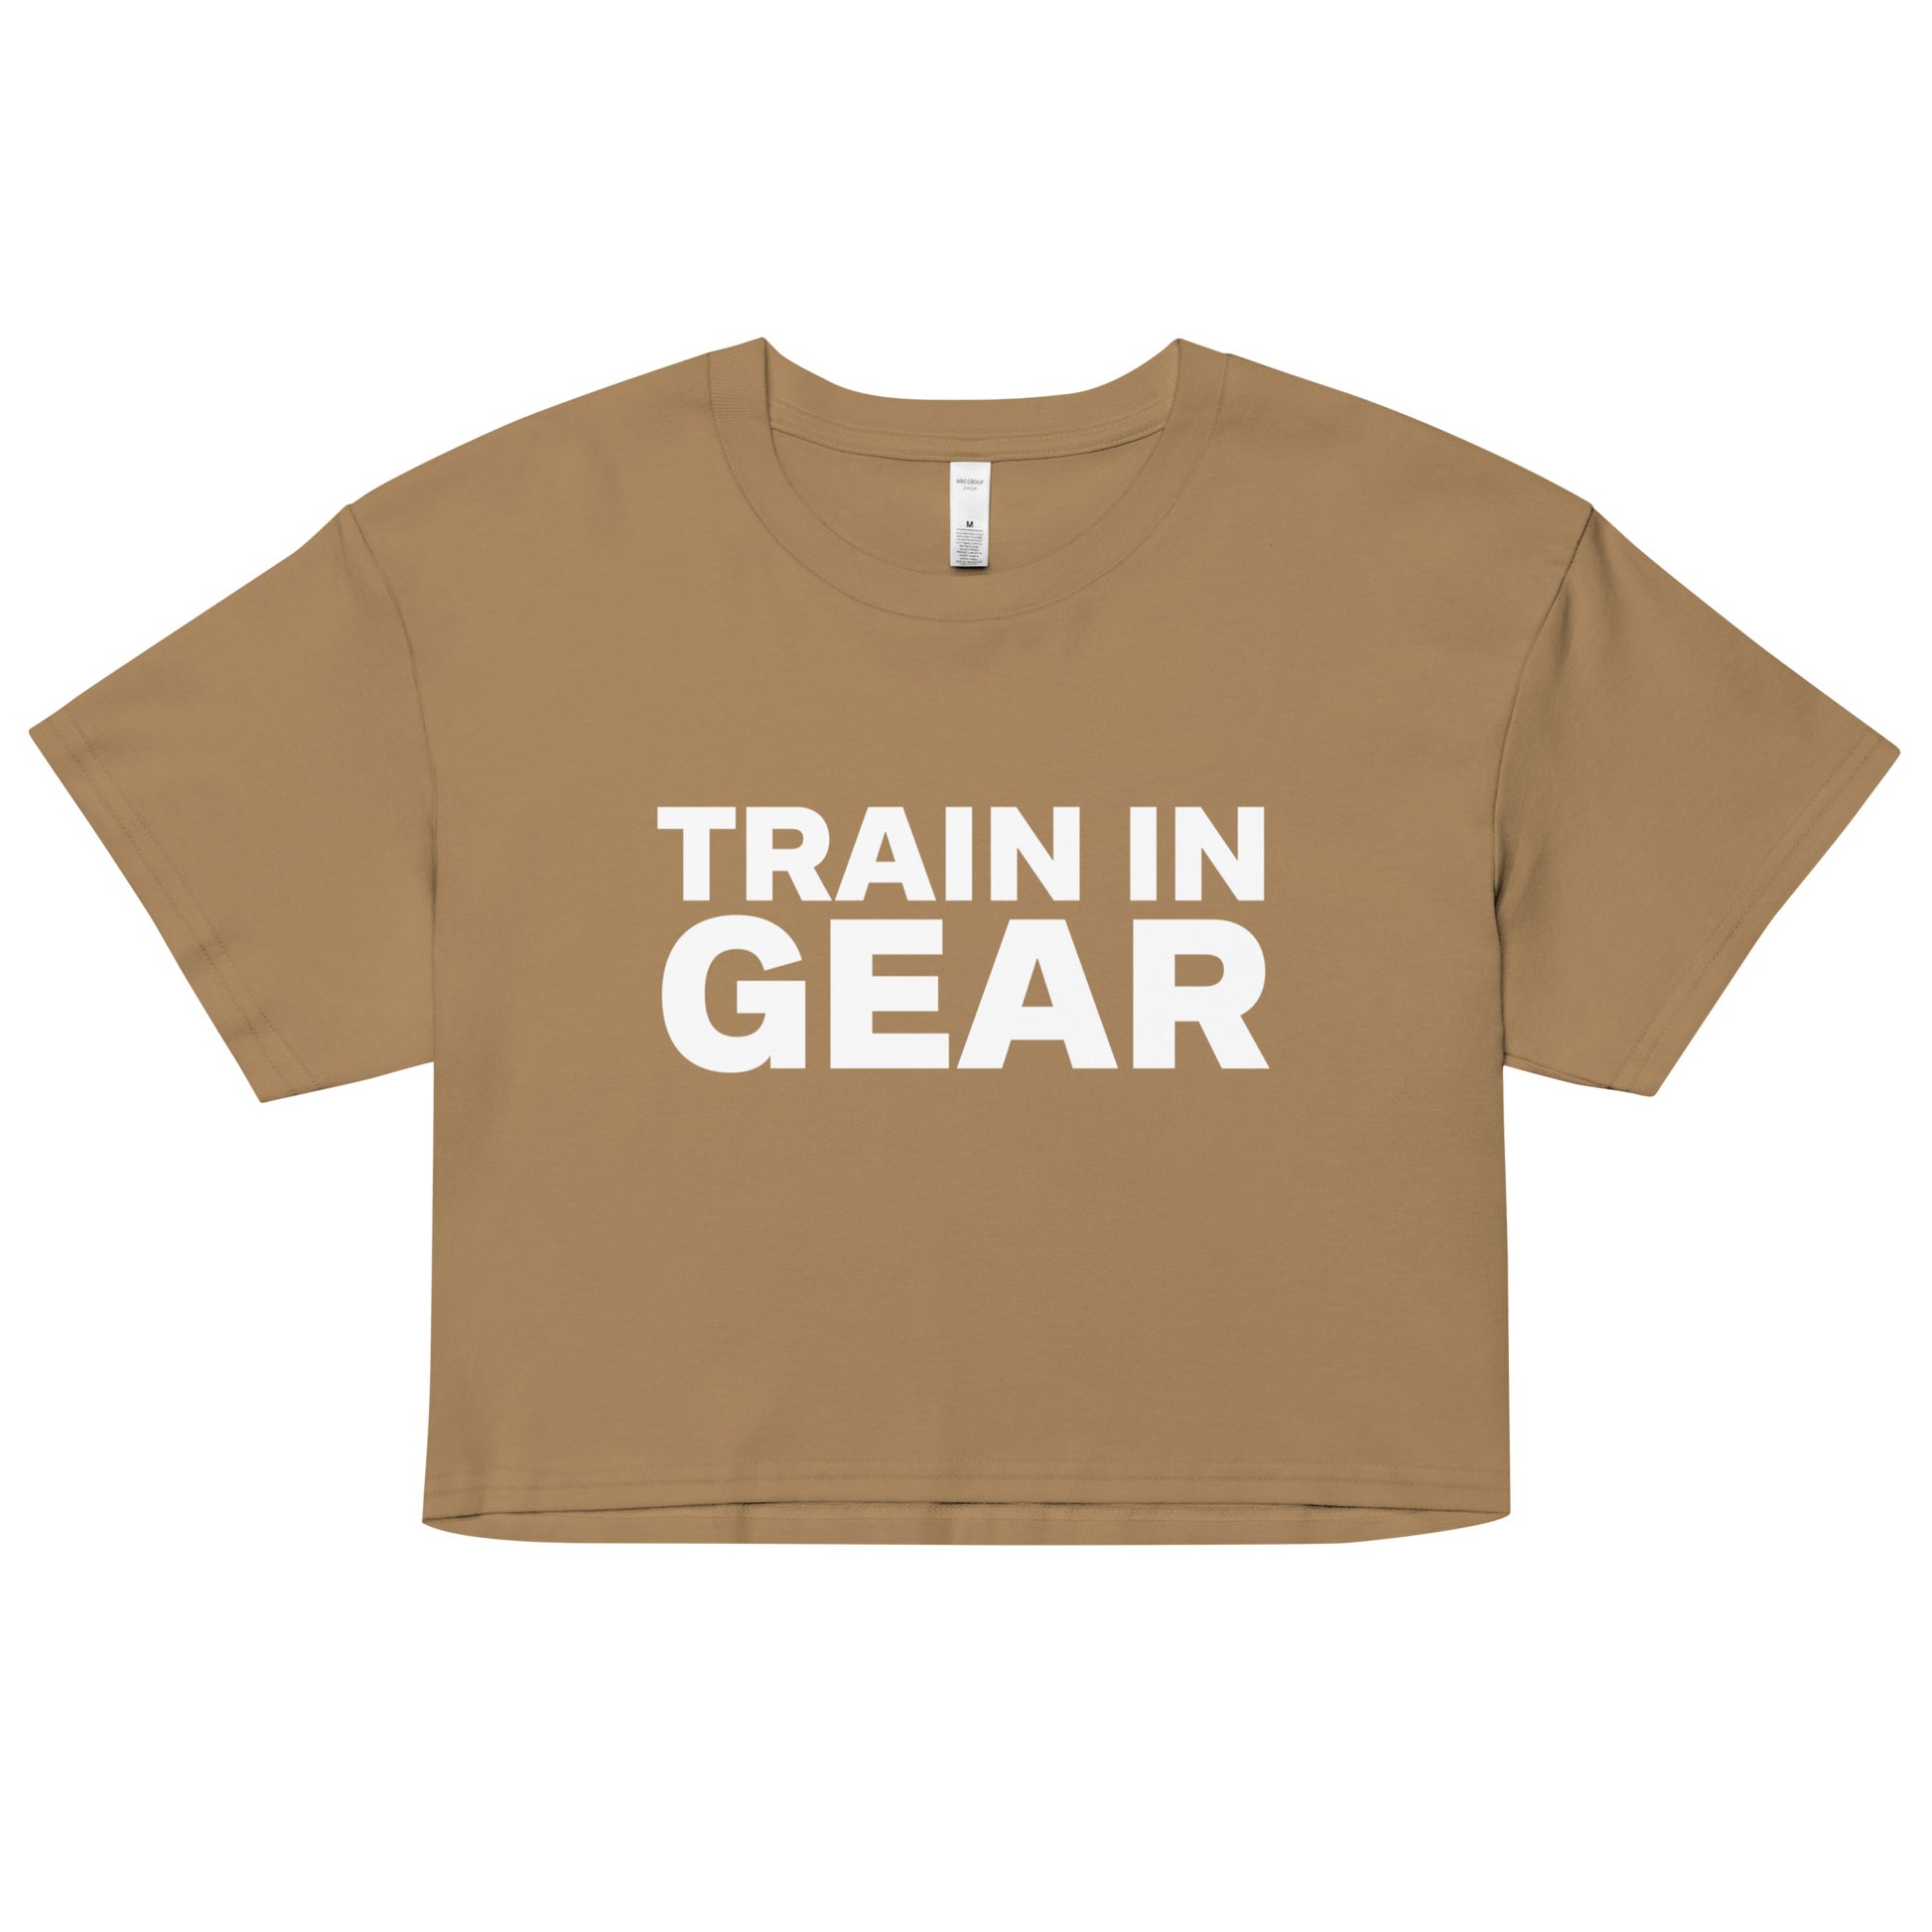 Train in Gear Women's firefighter and military crop top. Camel and white.